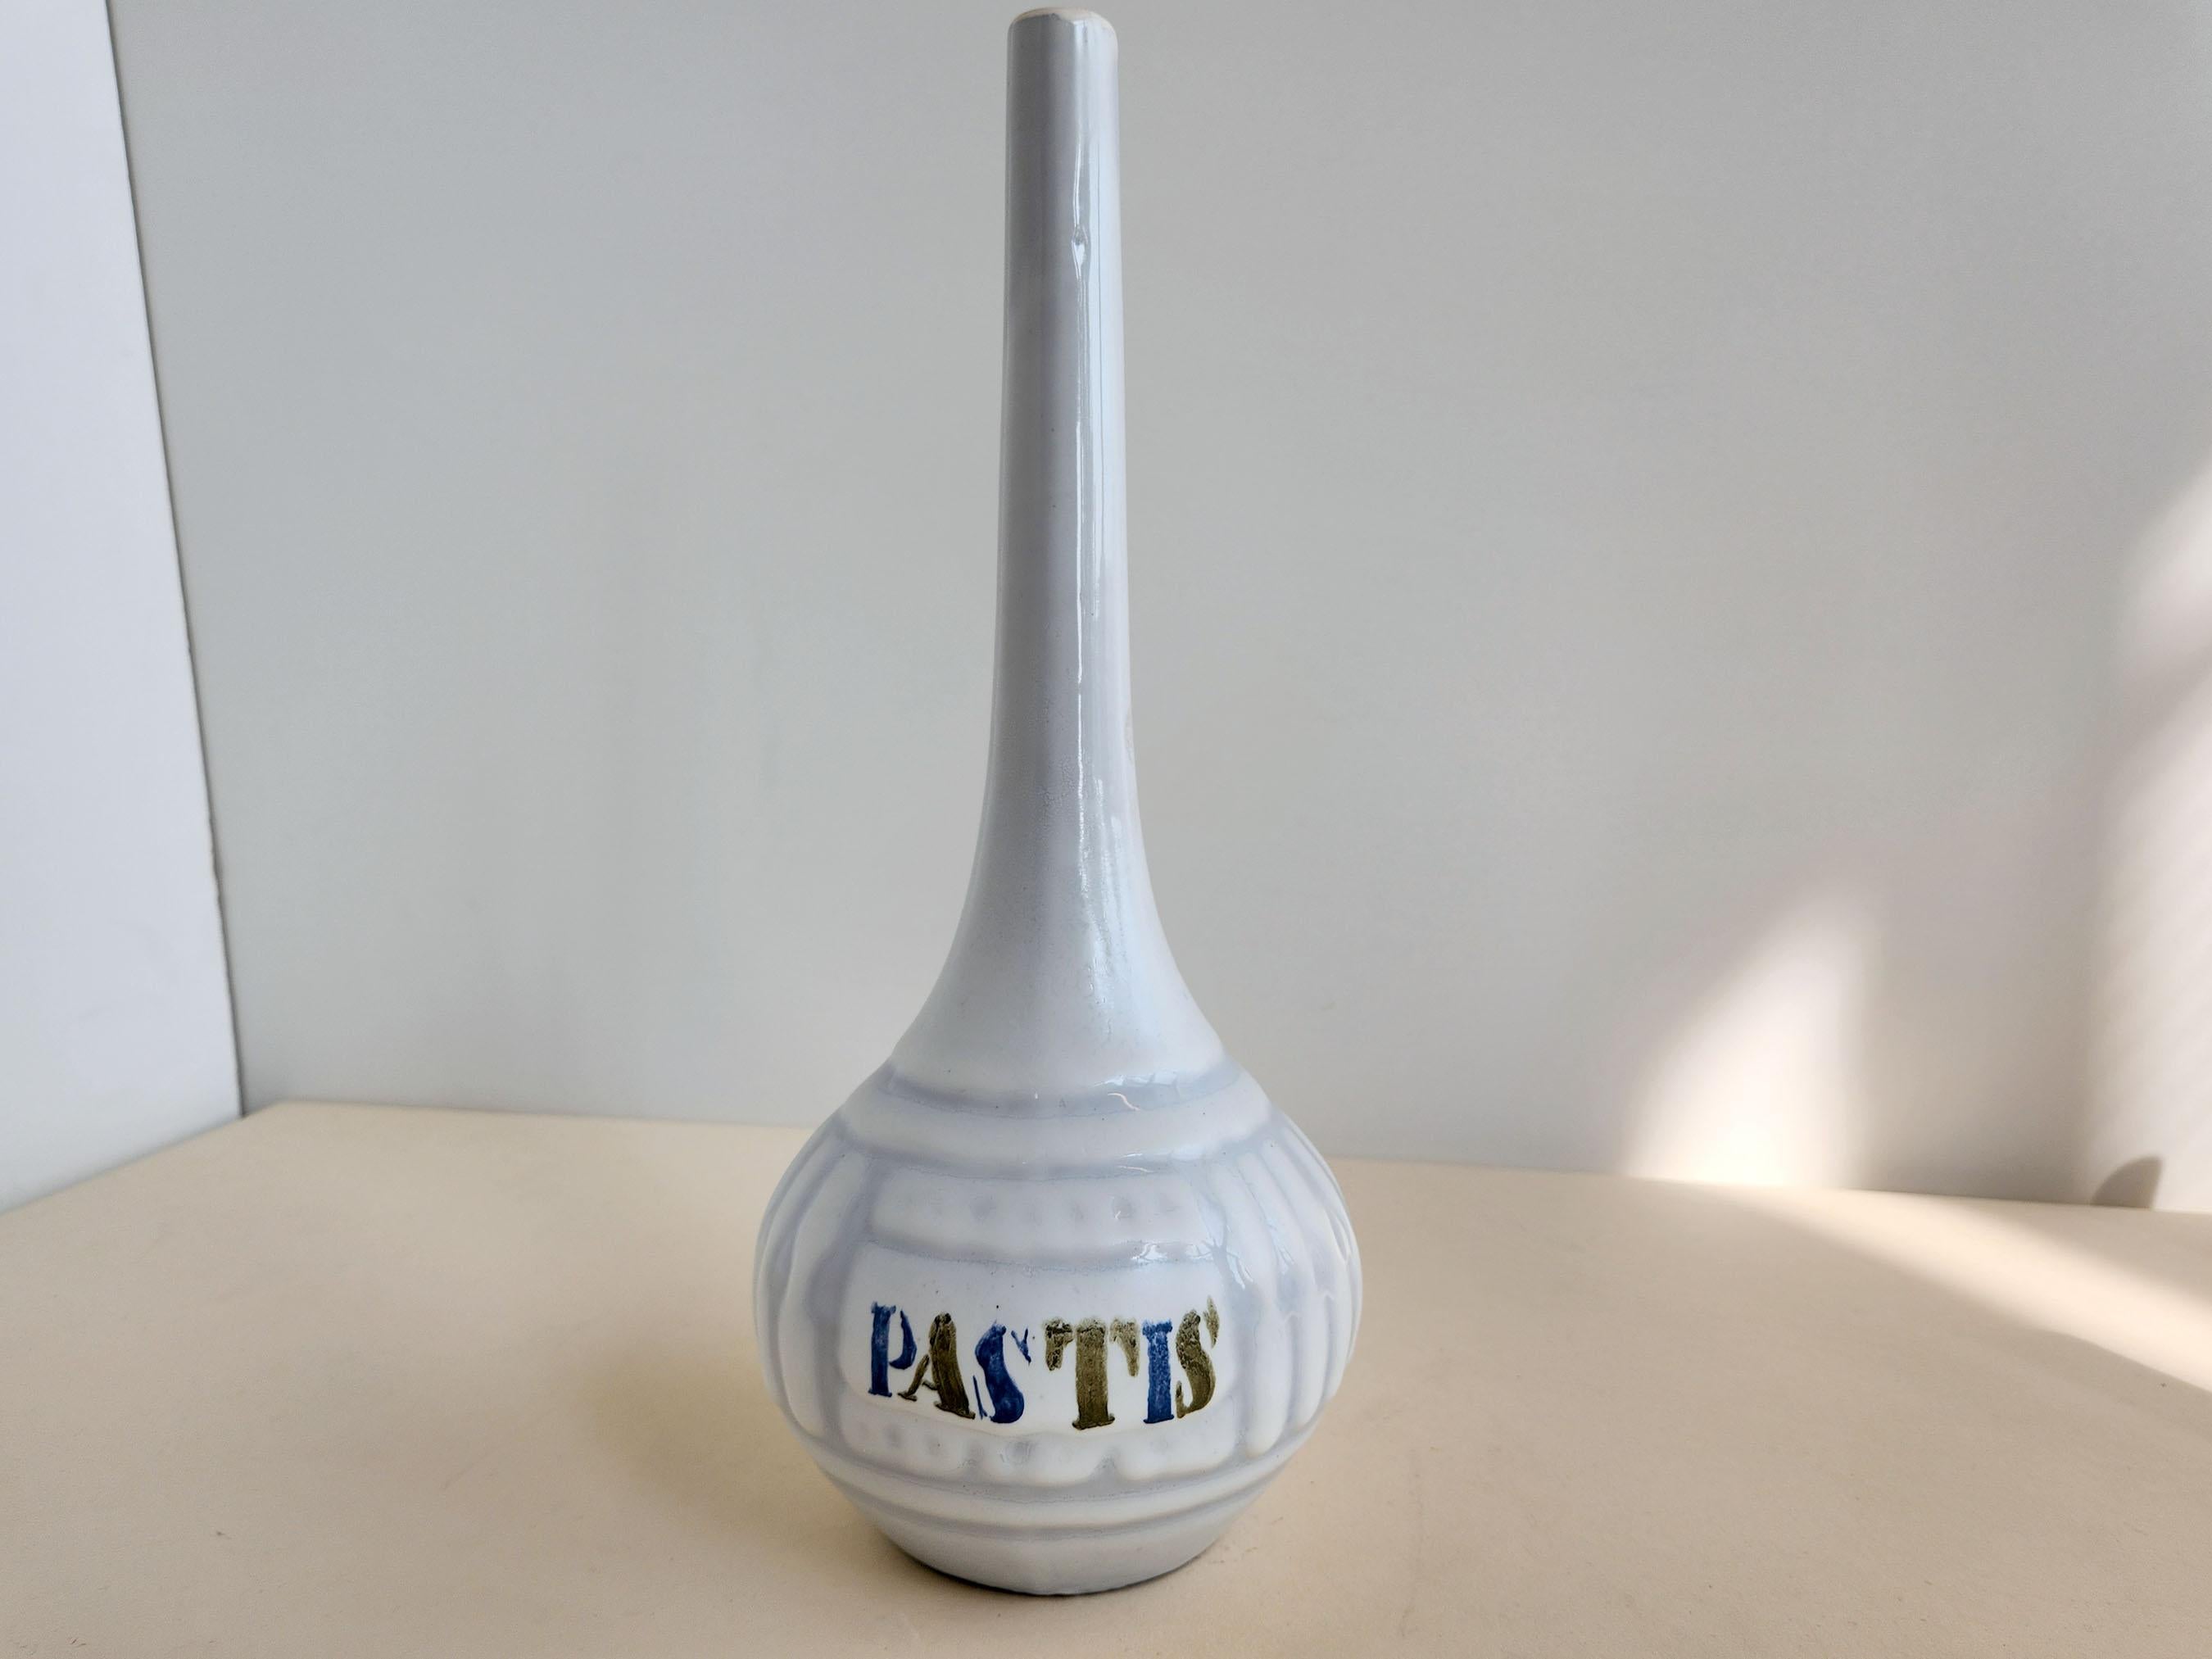 Vintage Ceramic Pastis Decanter with Long Neck by Roger Capron - Vallauris, France

Roger Capron was in influential French ceramicist, known for his tiled tables and his use of recurring motifs such as stylized branches and geometrical suns.   He